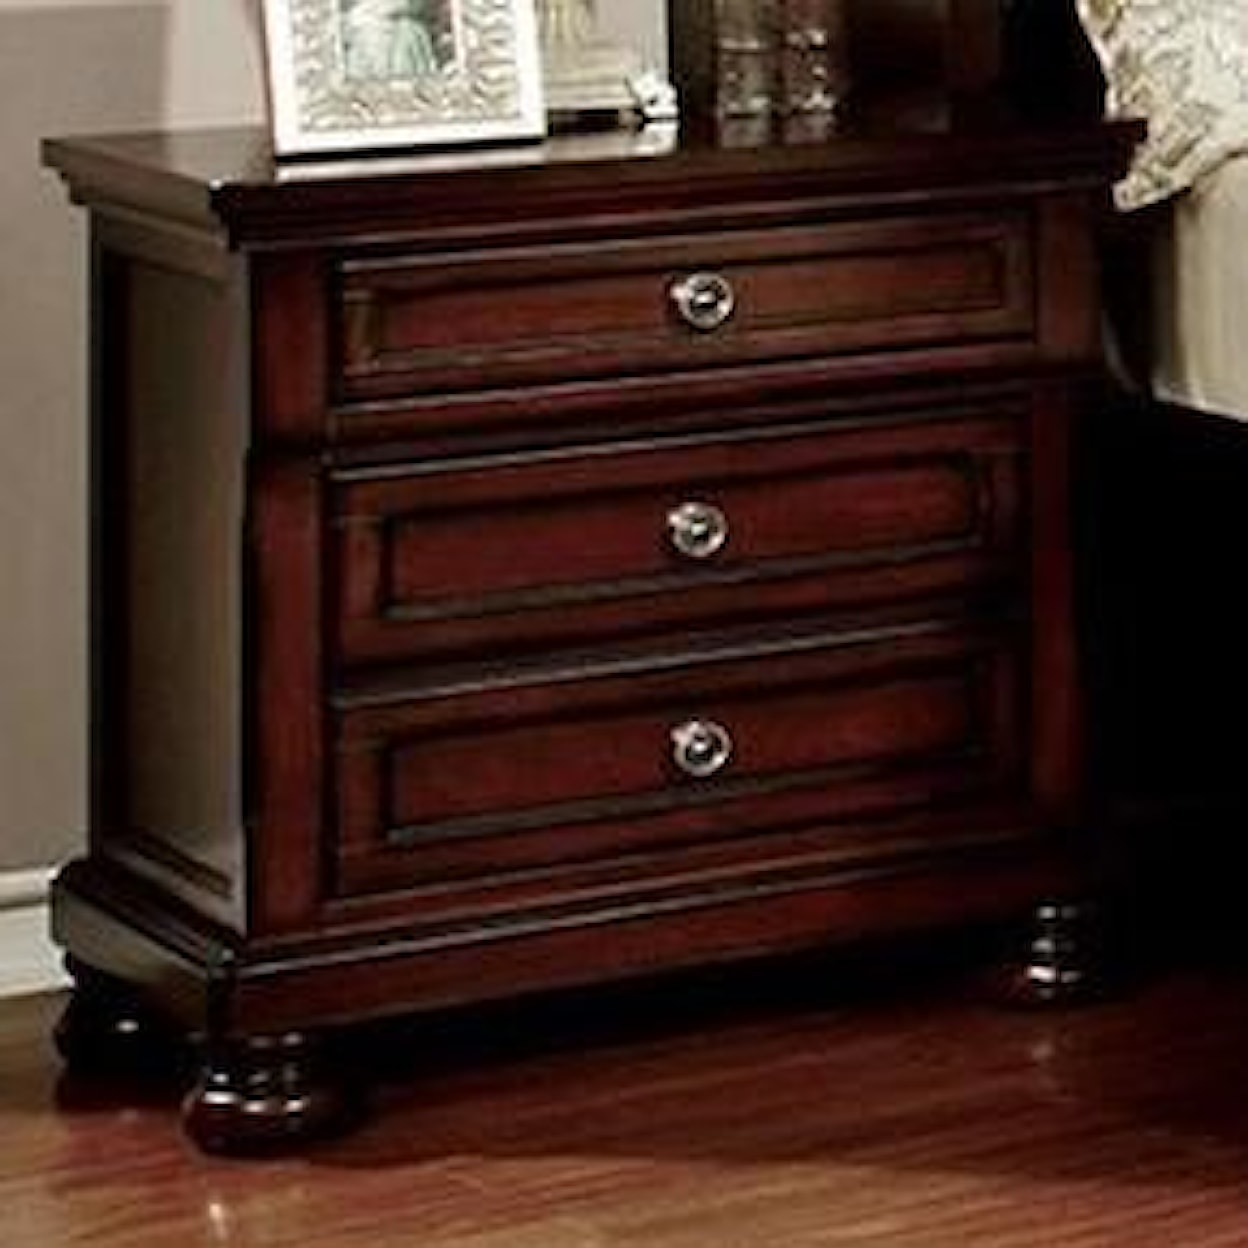 Furniture of America Northville Night Stand